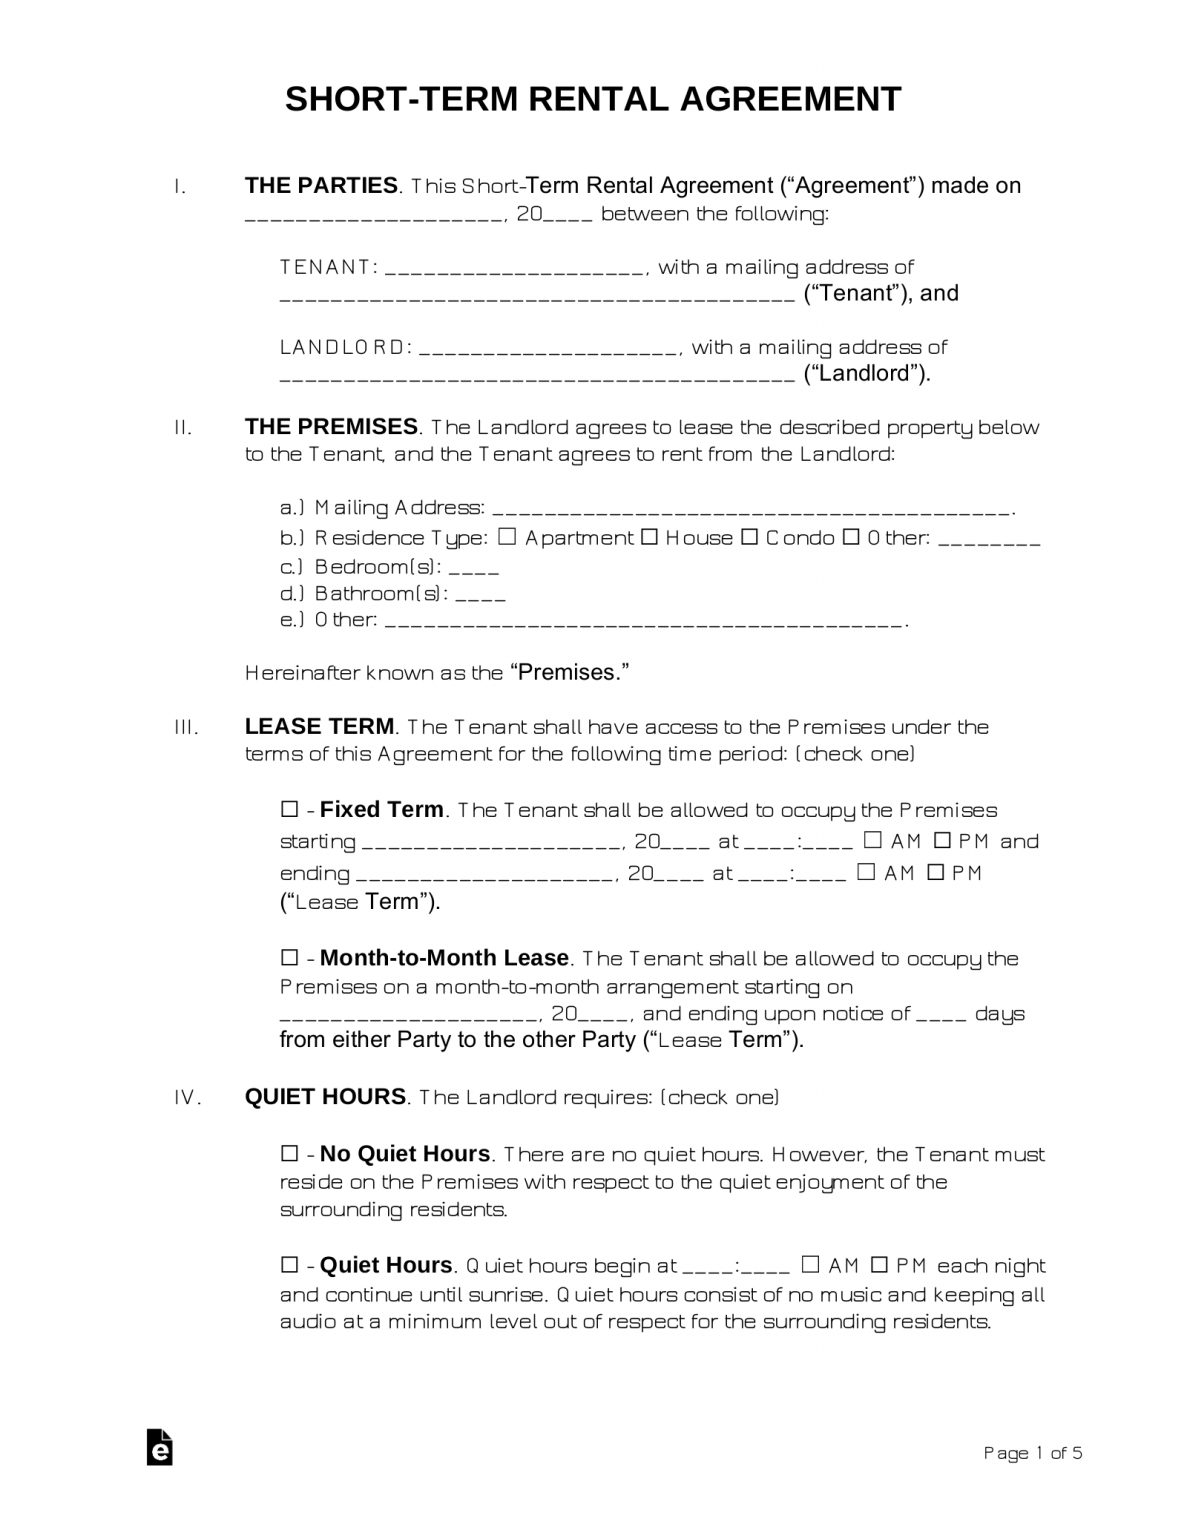 free-short-term-vacation-rental-lease-agreement-pdf-word-eforms